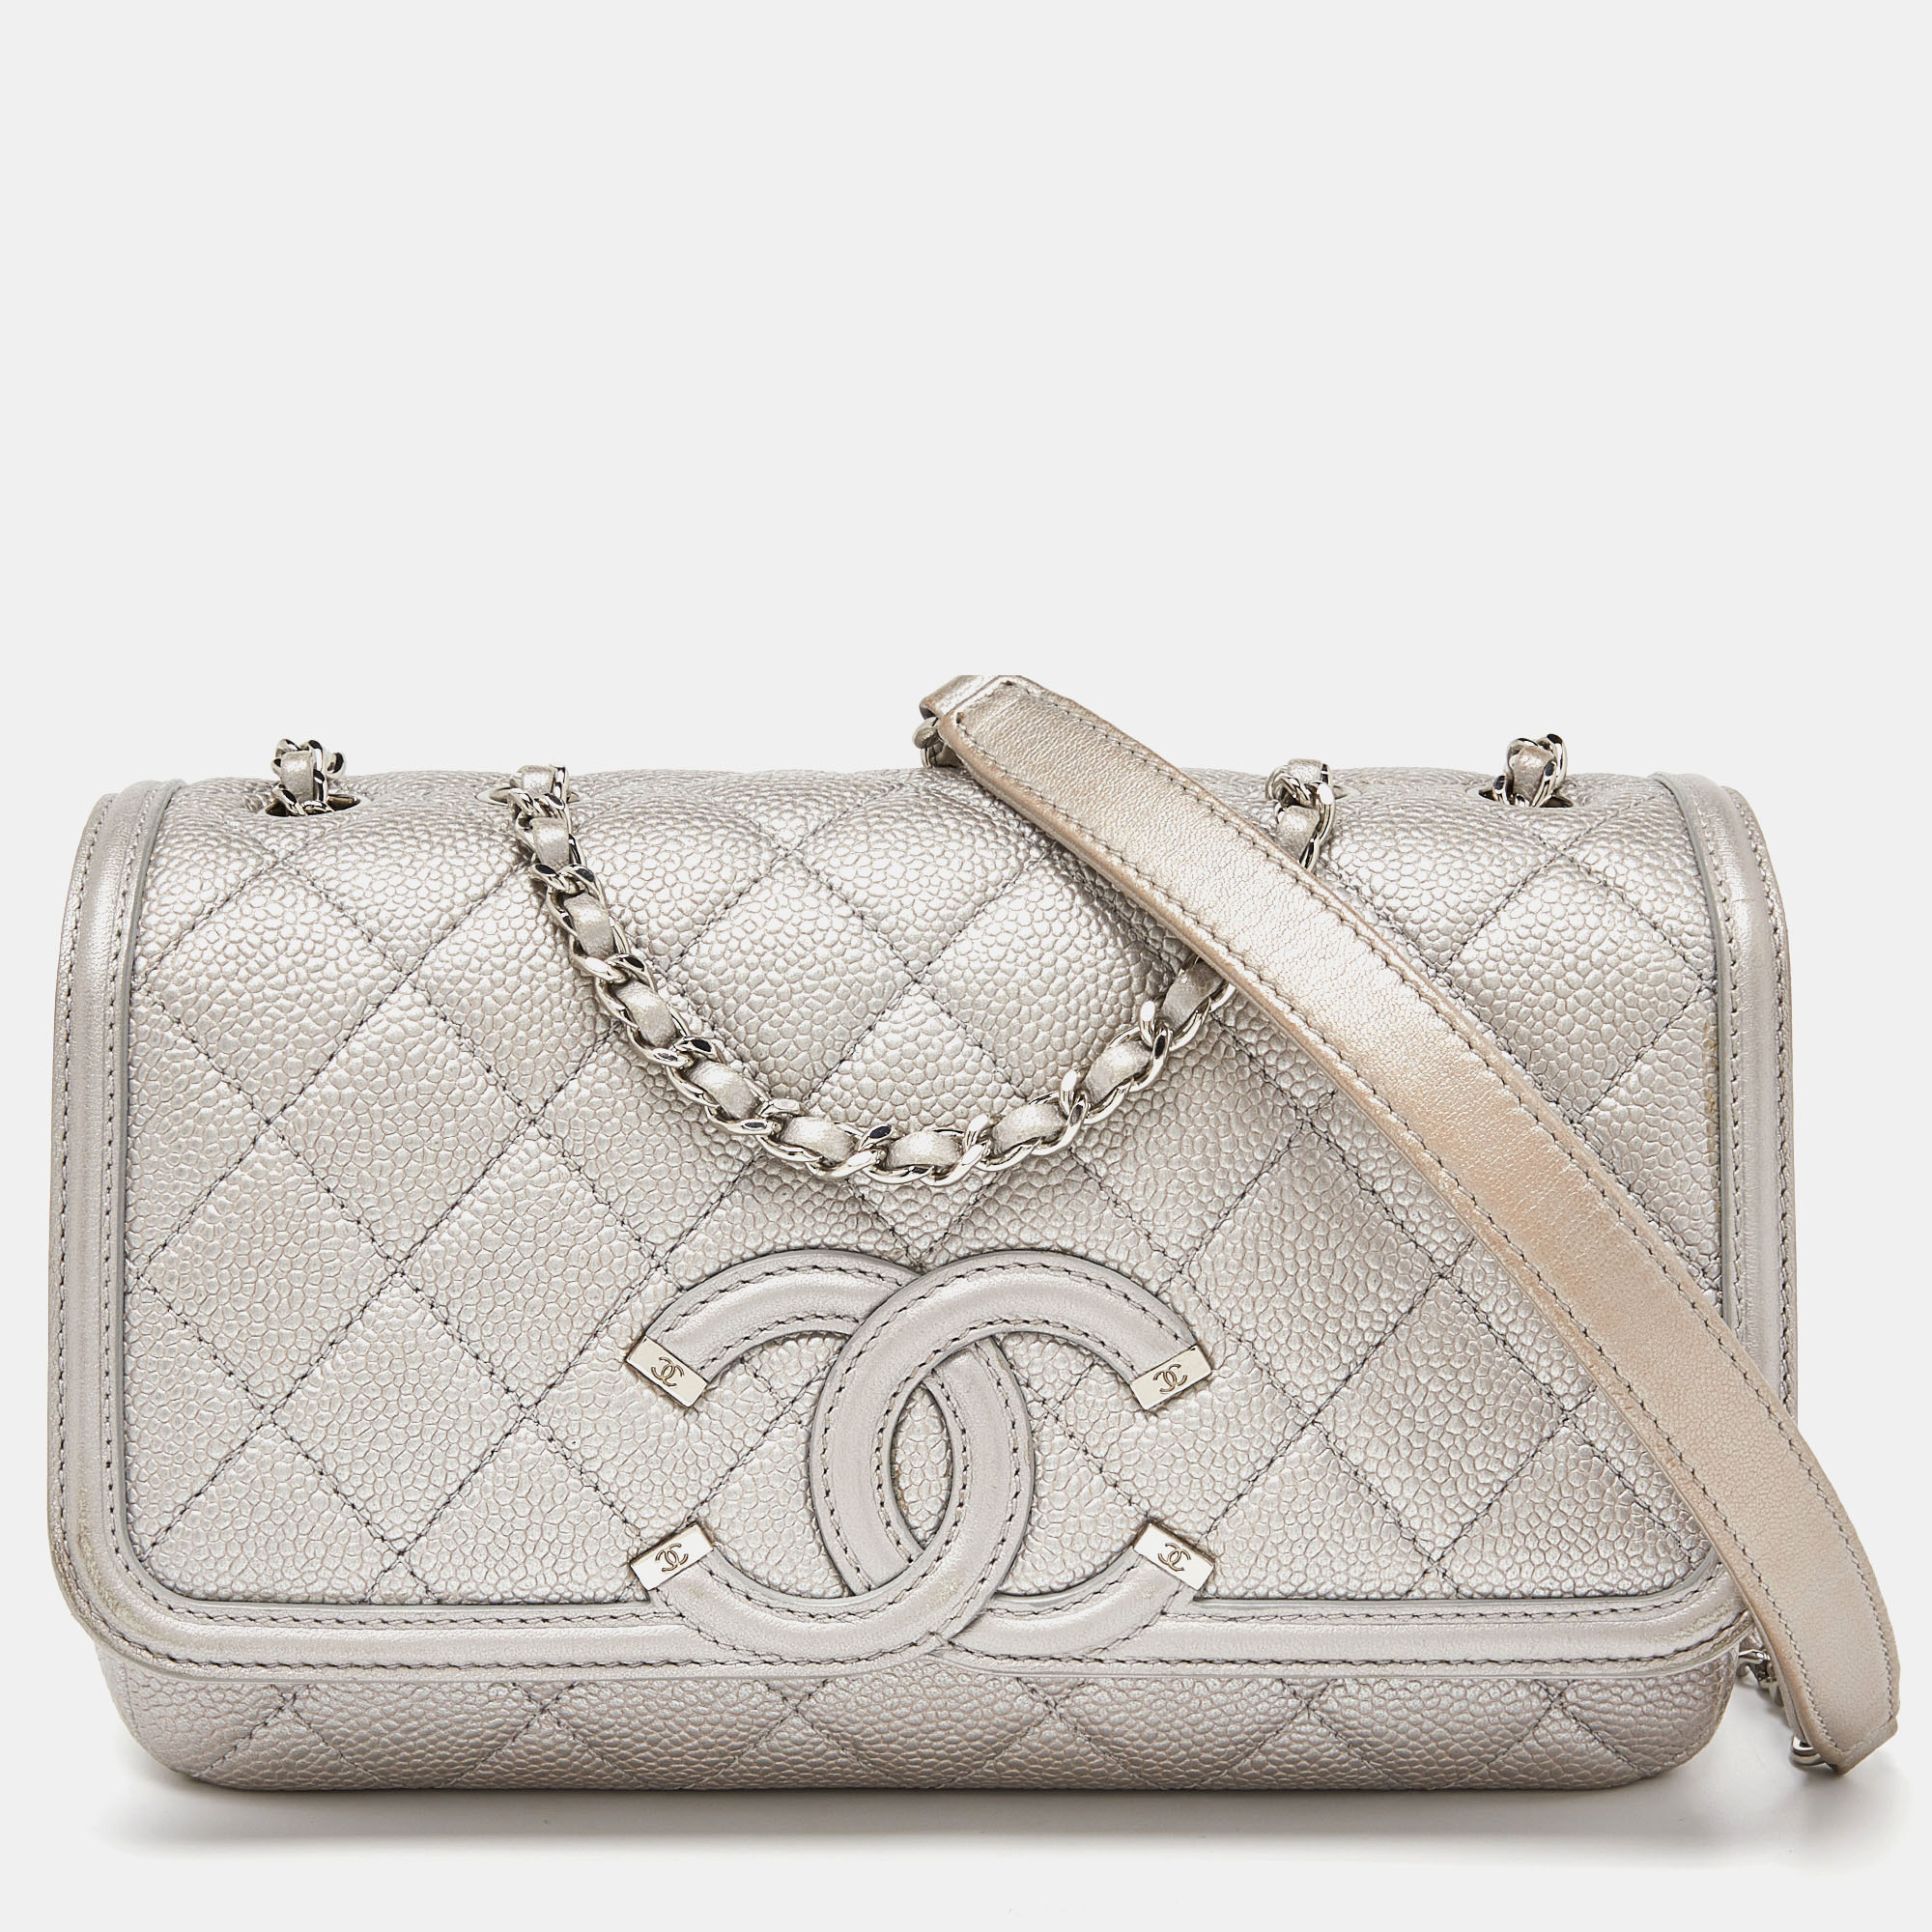 Pre-owned Chanel Silver Quilted Caviar Leather Small Cc Filigree Flap Bag